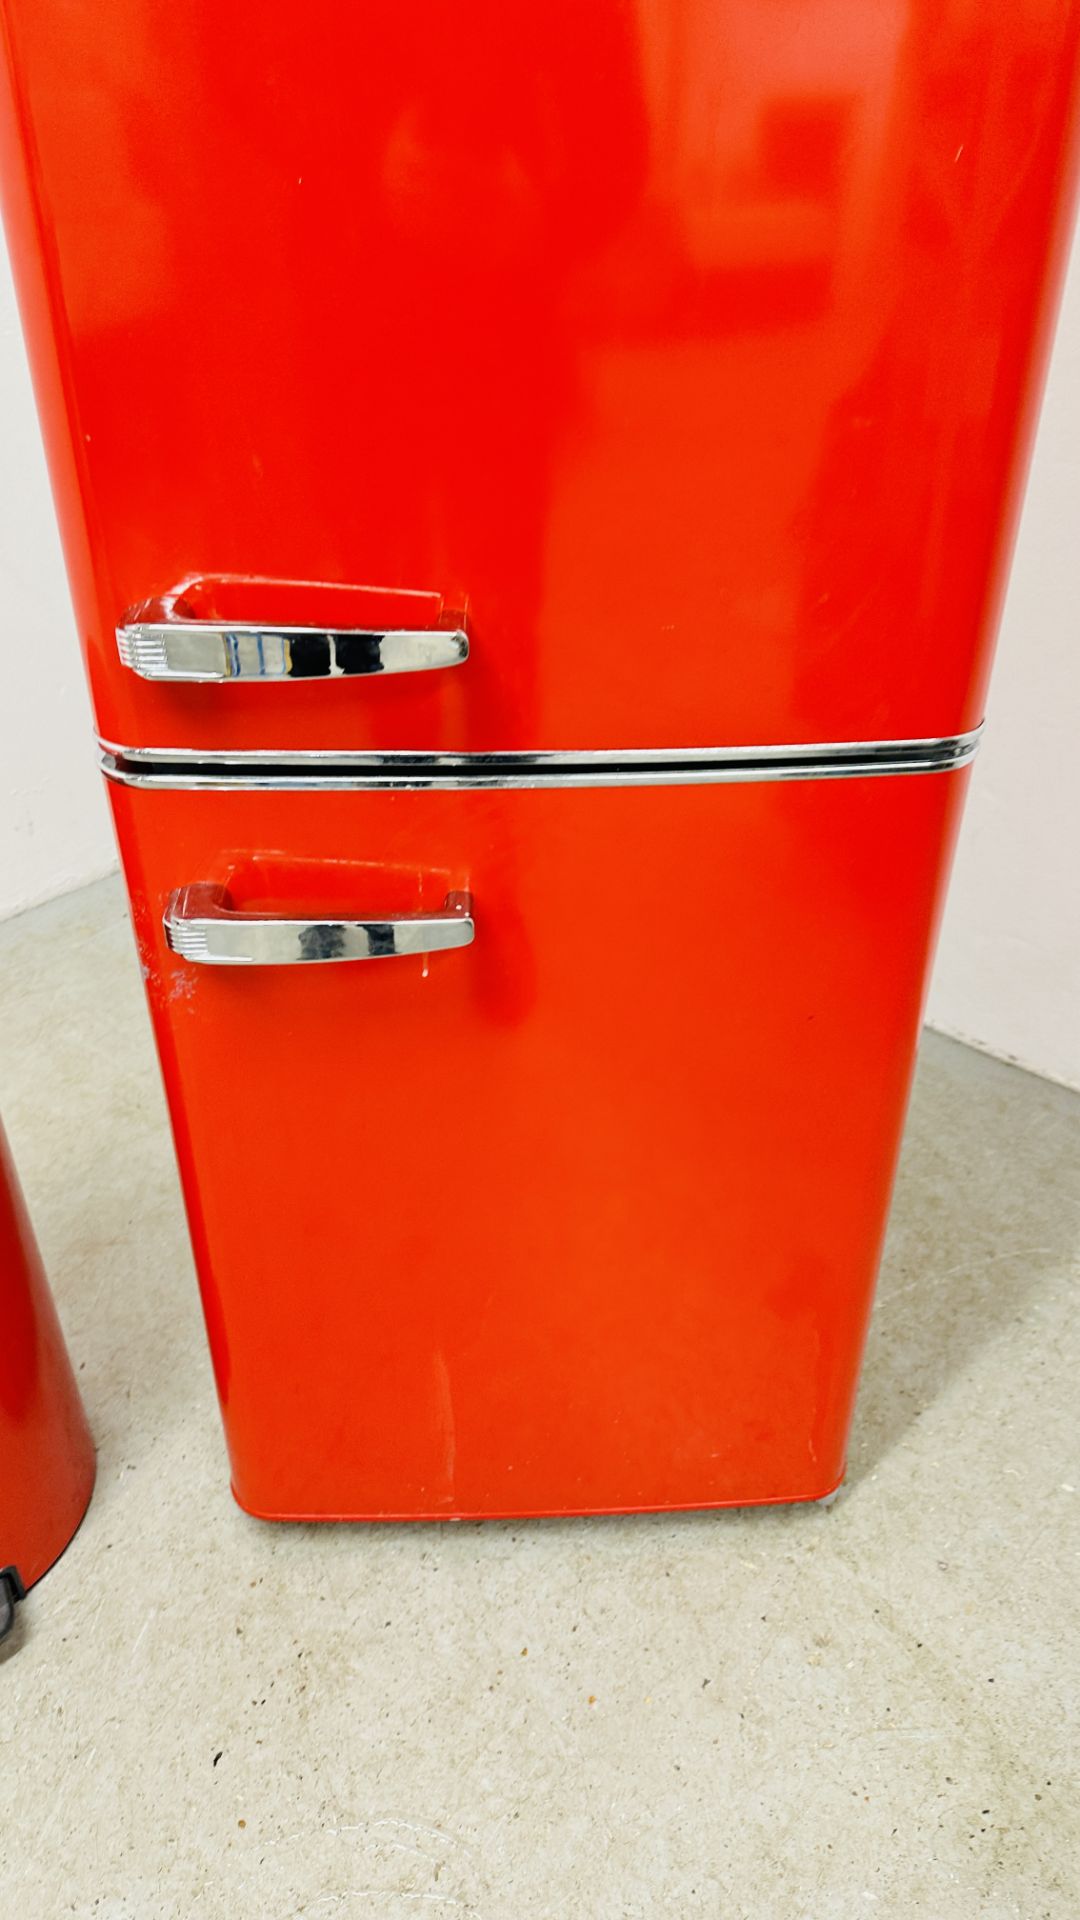 RETRO STYLE AMICA RED FINISH FRIDGE FREEZER + RED PEDAL BIN - SOLD AS SEEN. - Image 5 of 10